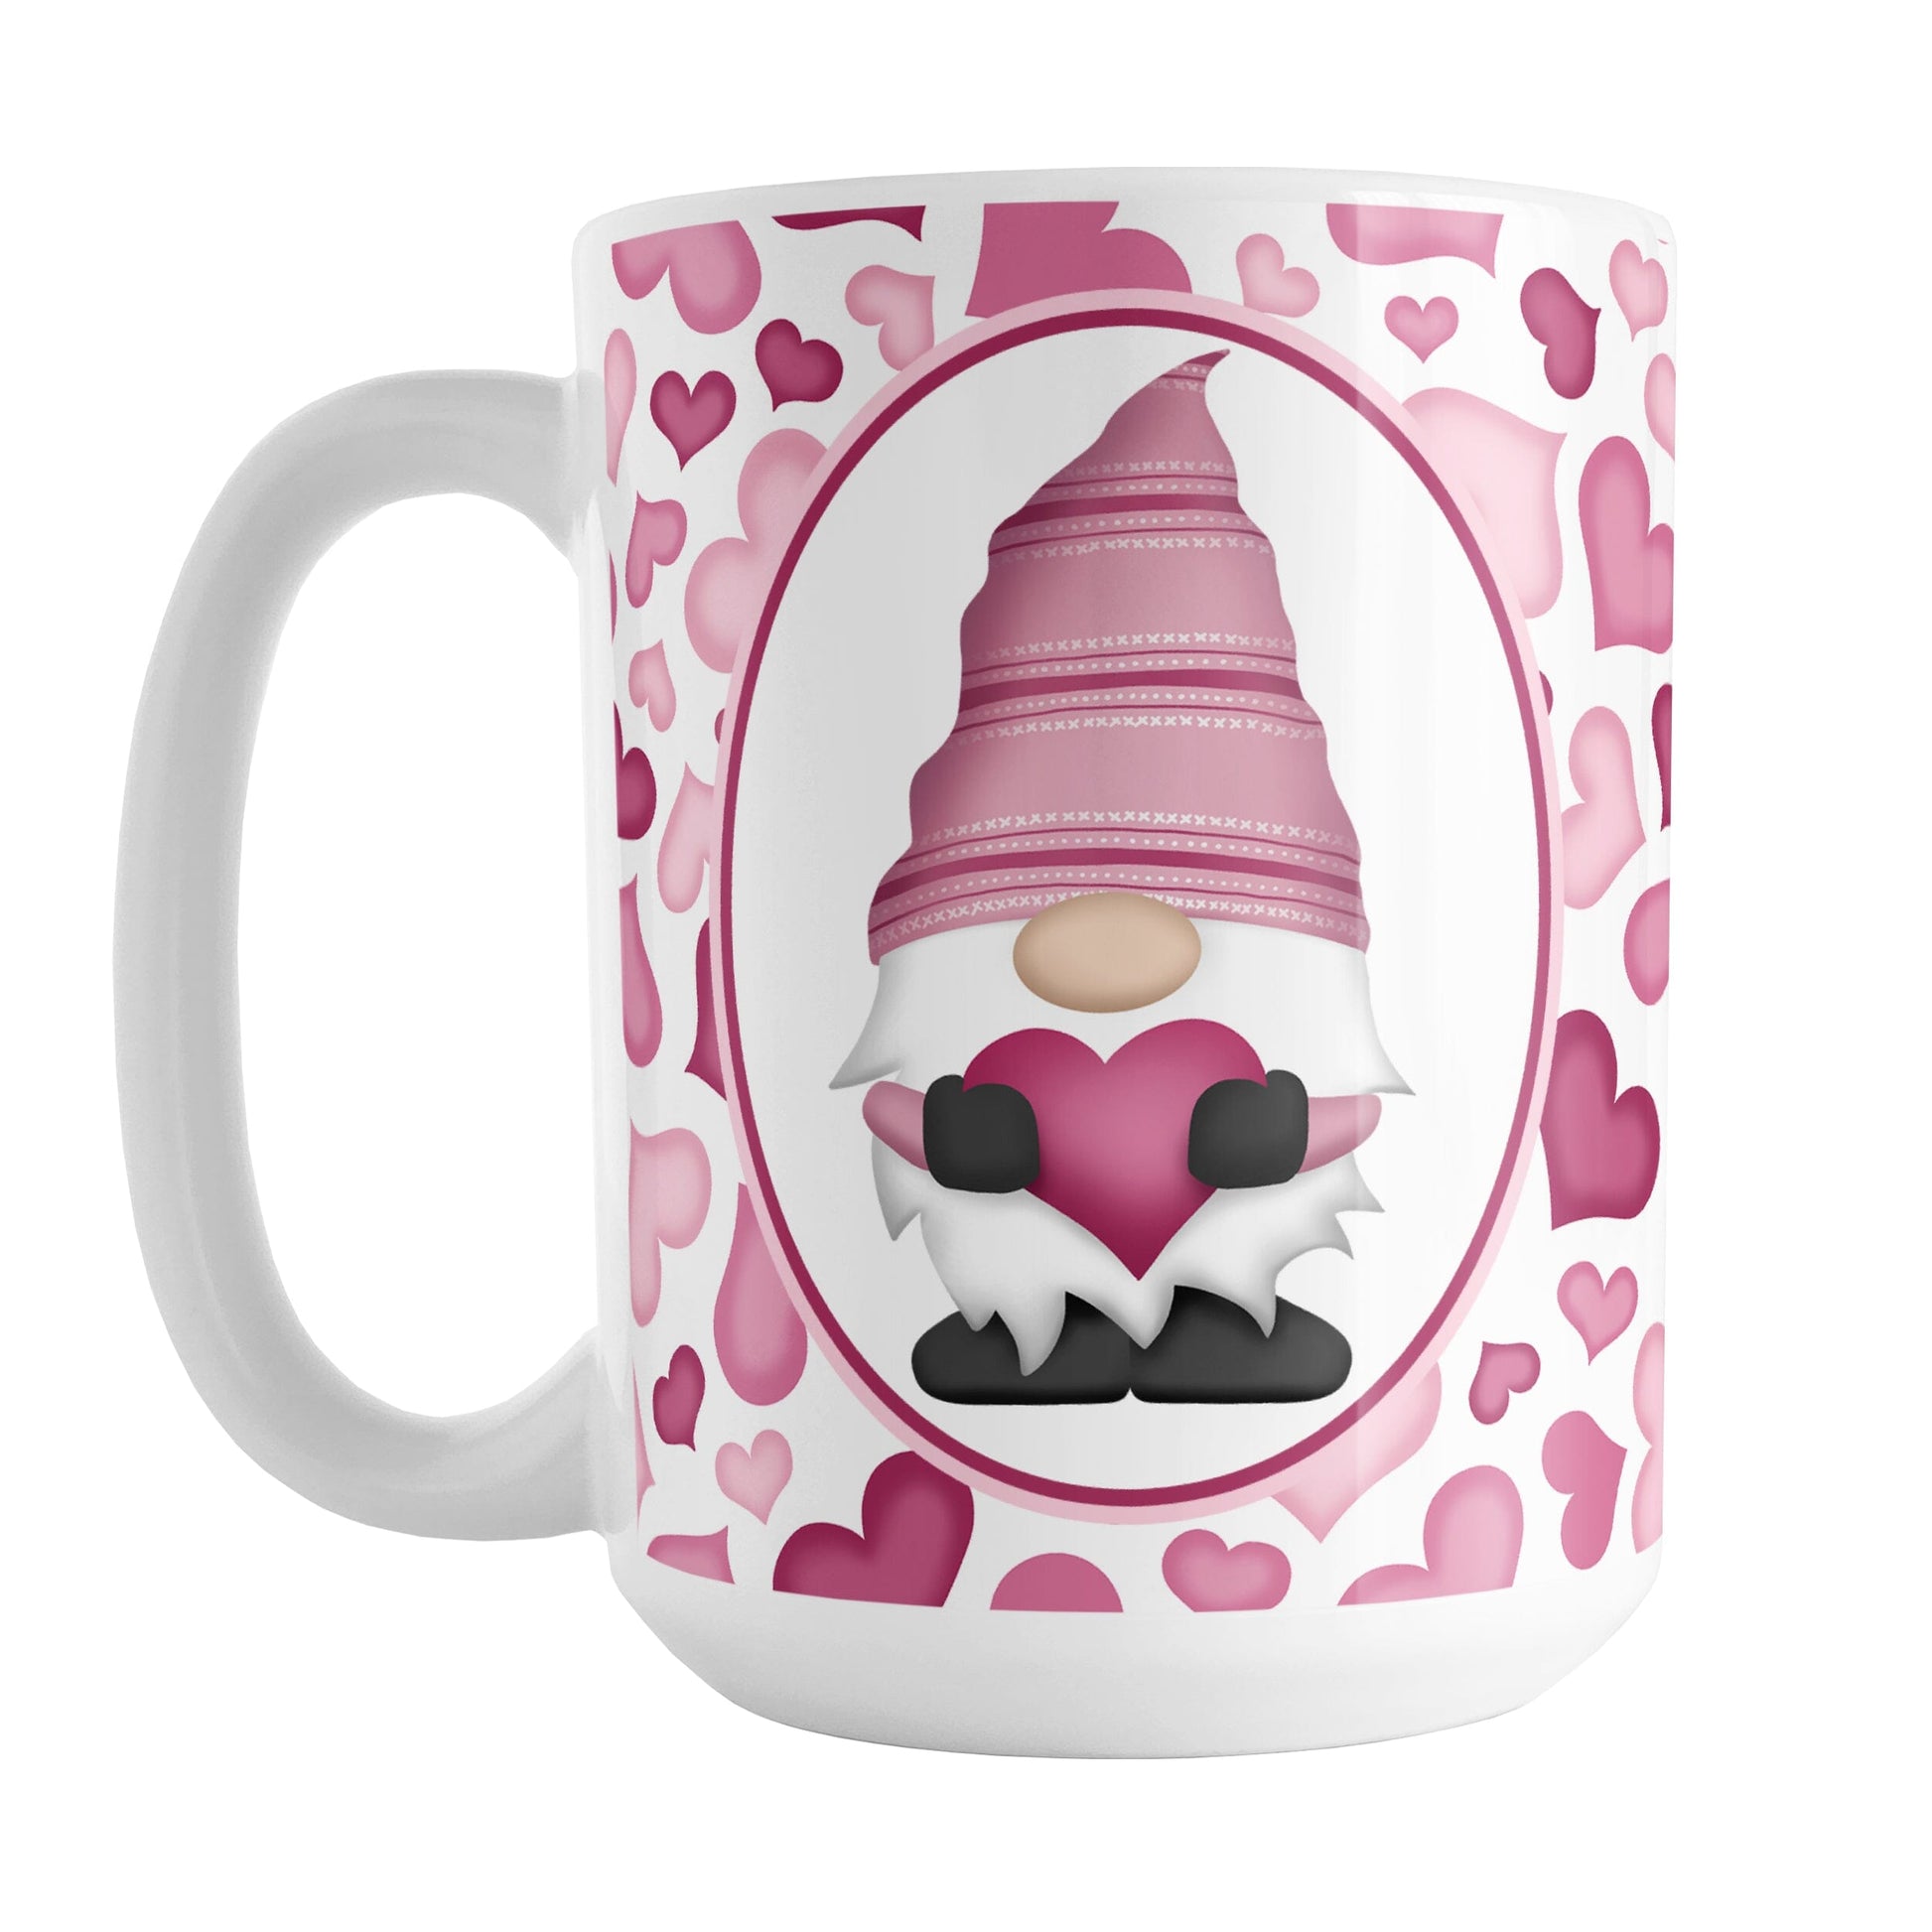 Pink Gnome Hearts Mug (15oz) at Amy's Coffee Mugs. A ceramic coffee mug designed with an adorable pink gnome in a white oval on both sides of the mug over a pattern of cute hearts in different shades of pink that wrap around the mug to the handle.